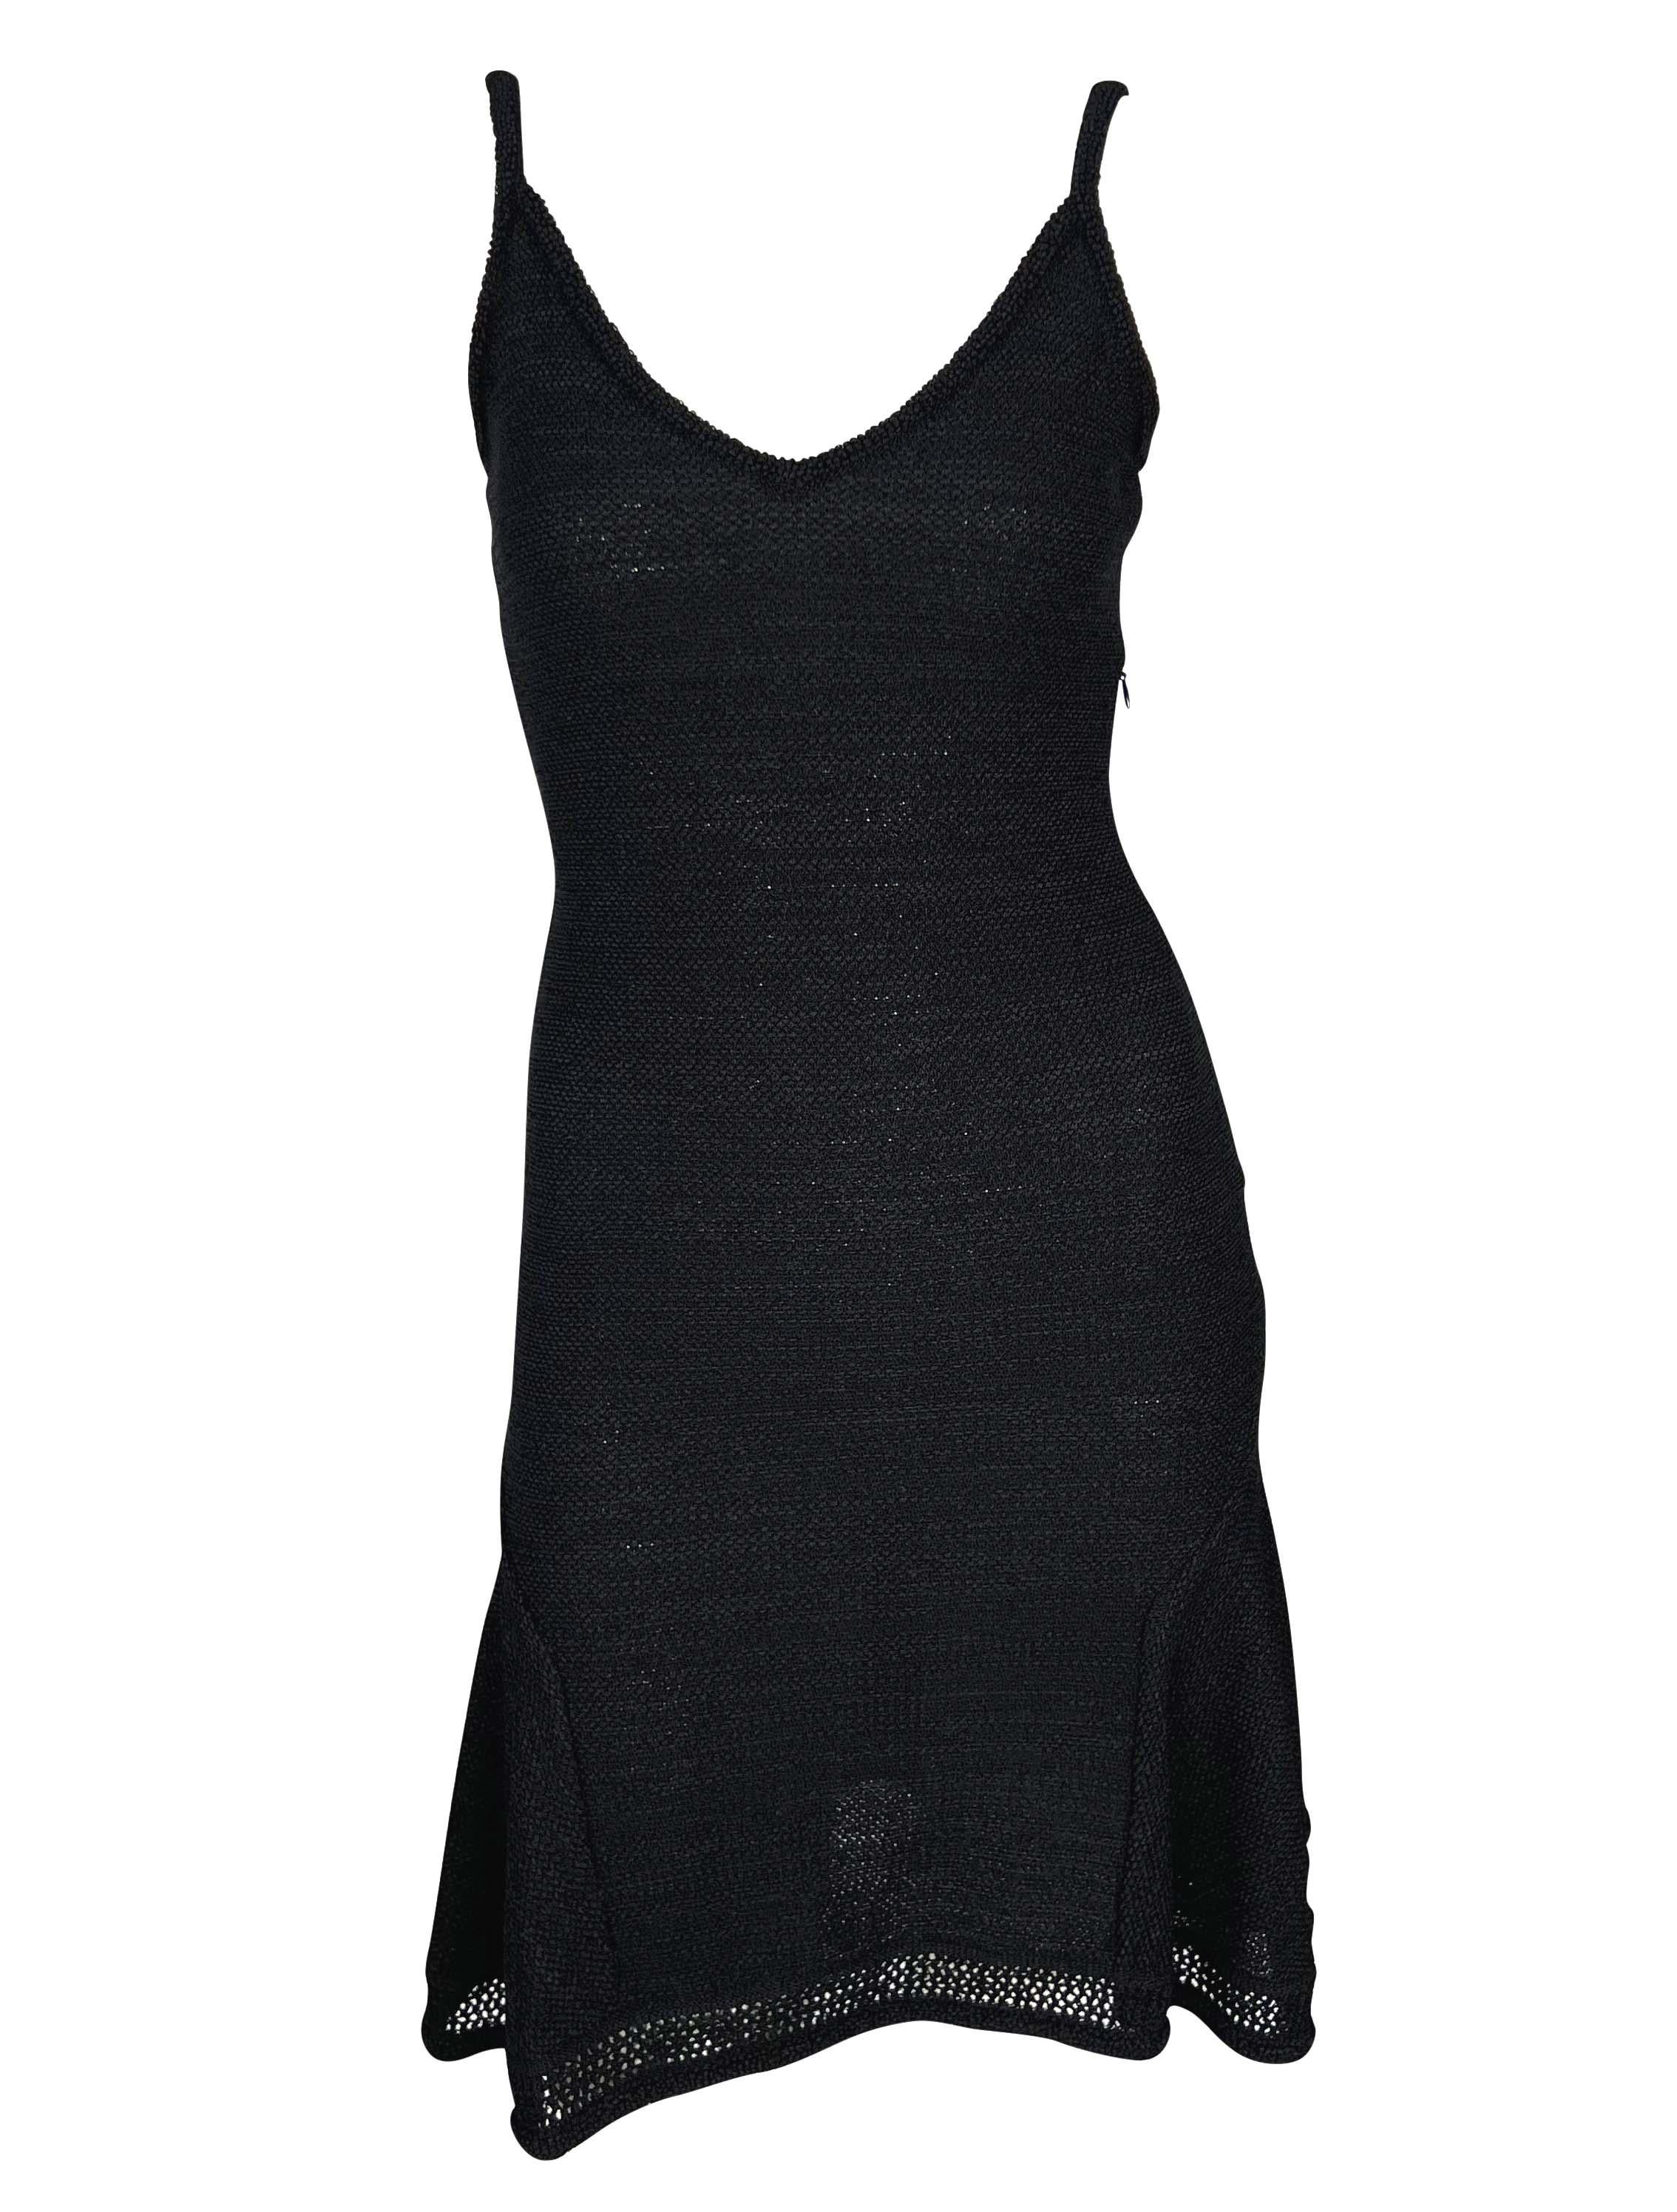 S/S 1999 John Galliano Stretch Knit Sheer Flare Black Sweater Dress For Sale 2